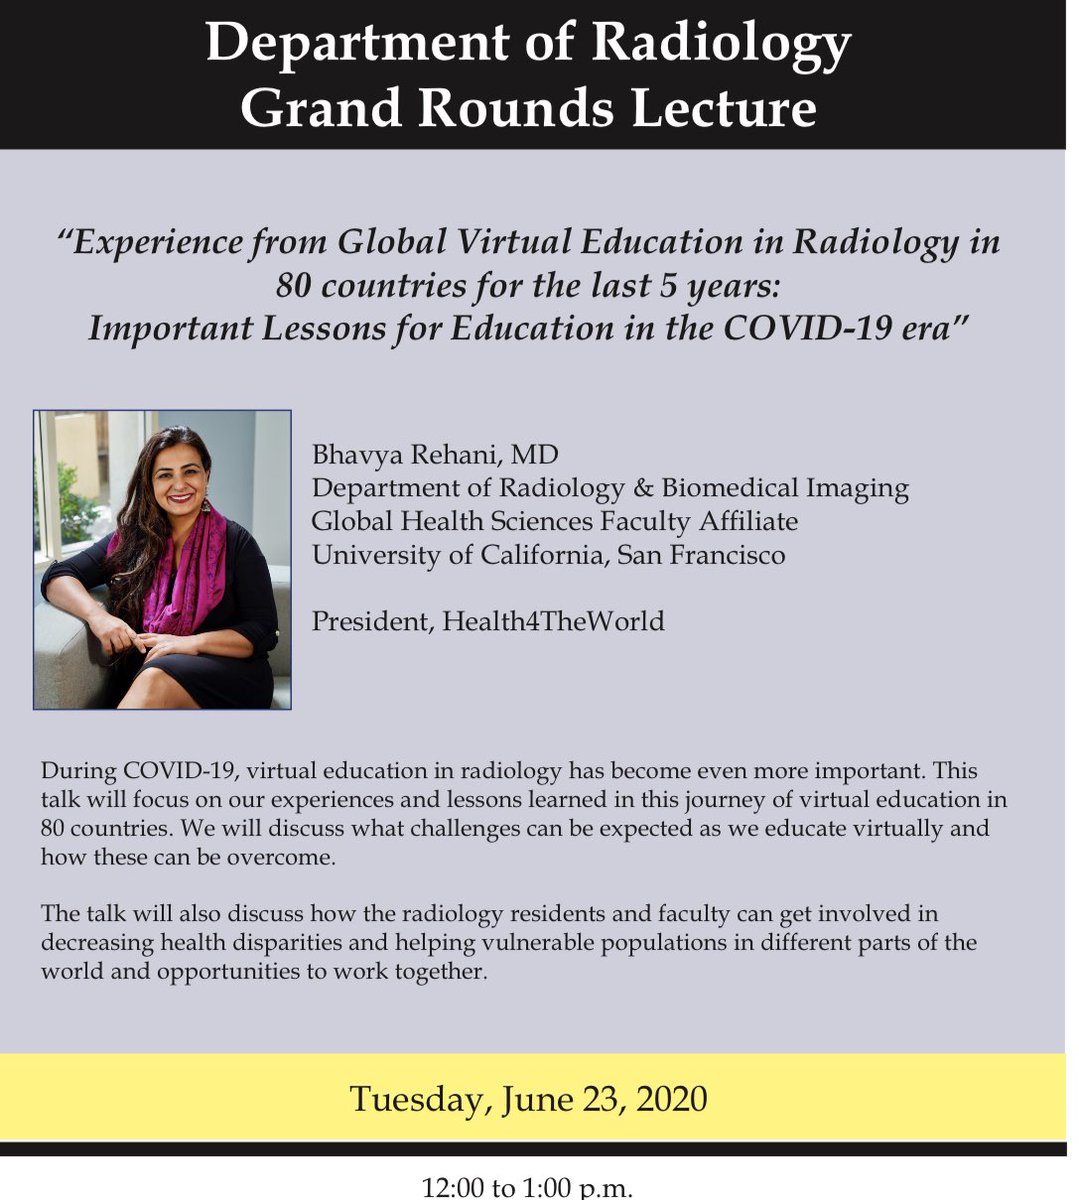 ⁦@UWRadiology⁩ #virtualgrandrounds speaker ⁦@BhavyaRehaniMD⁩ speaking on her excellent global virtual education program on Tuesday June 23 at 12 pm pst. Please dm me if interested in watching ⁦@UCSFimaging⁩